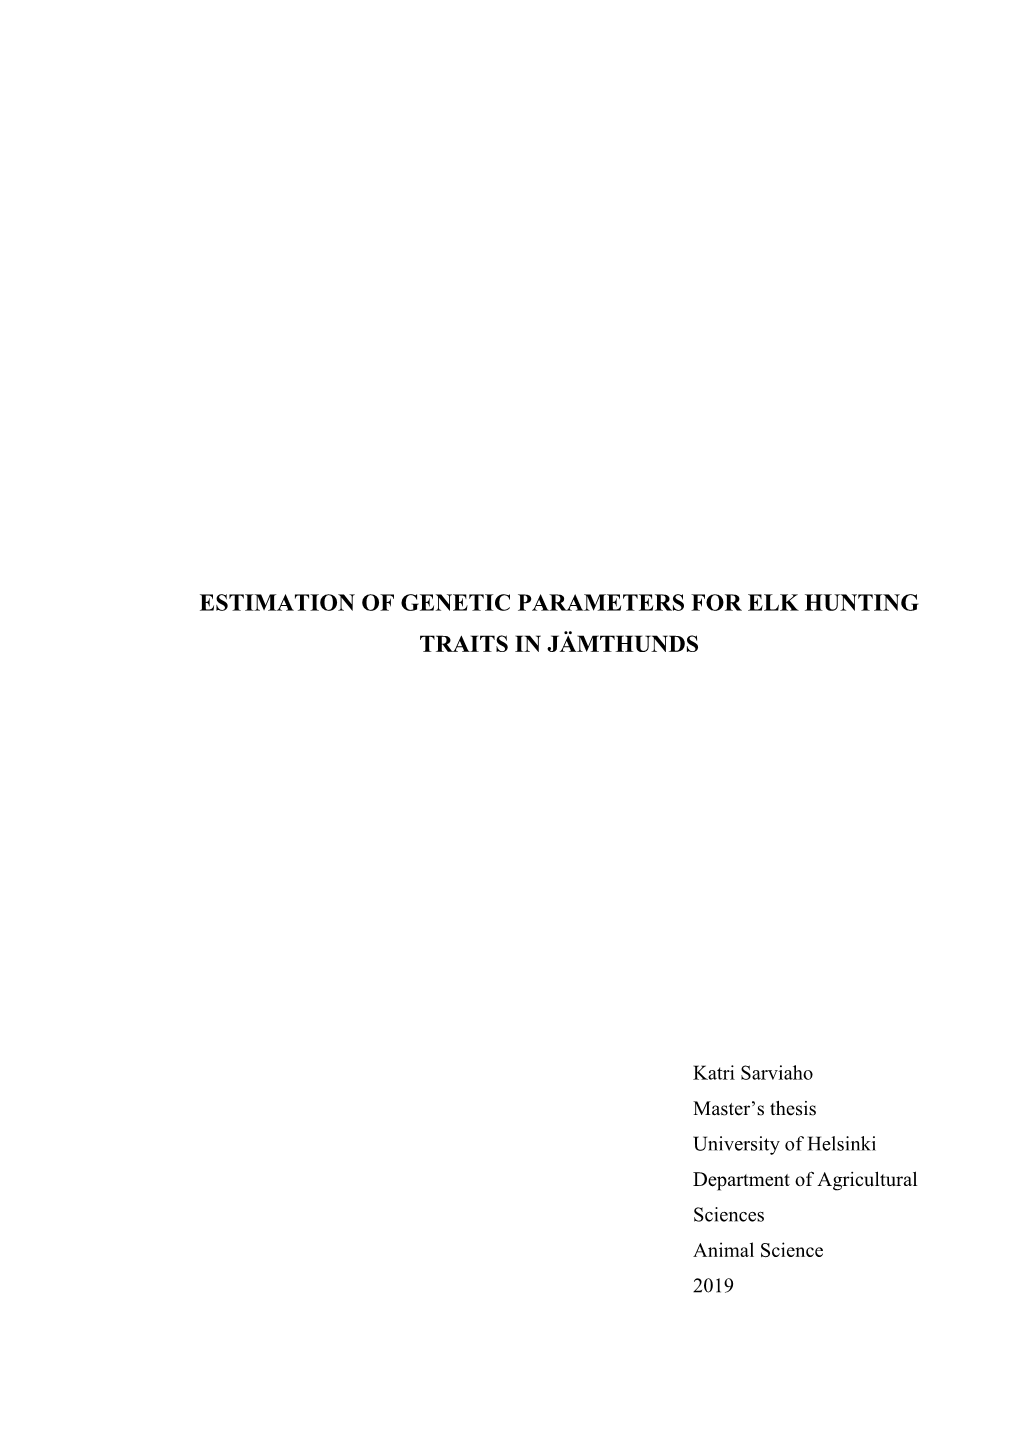 Estimation of Genetic Parameters for Elk Hunting Traits in Jämthunds